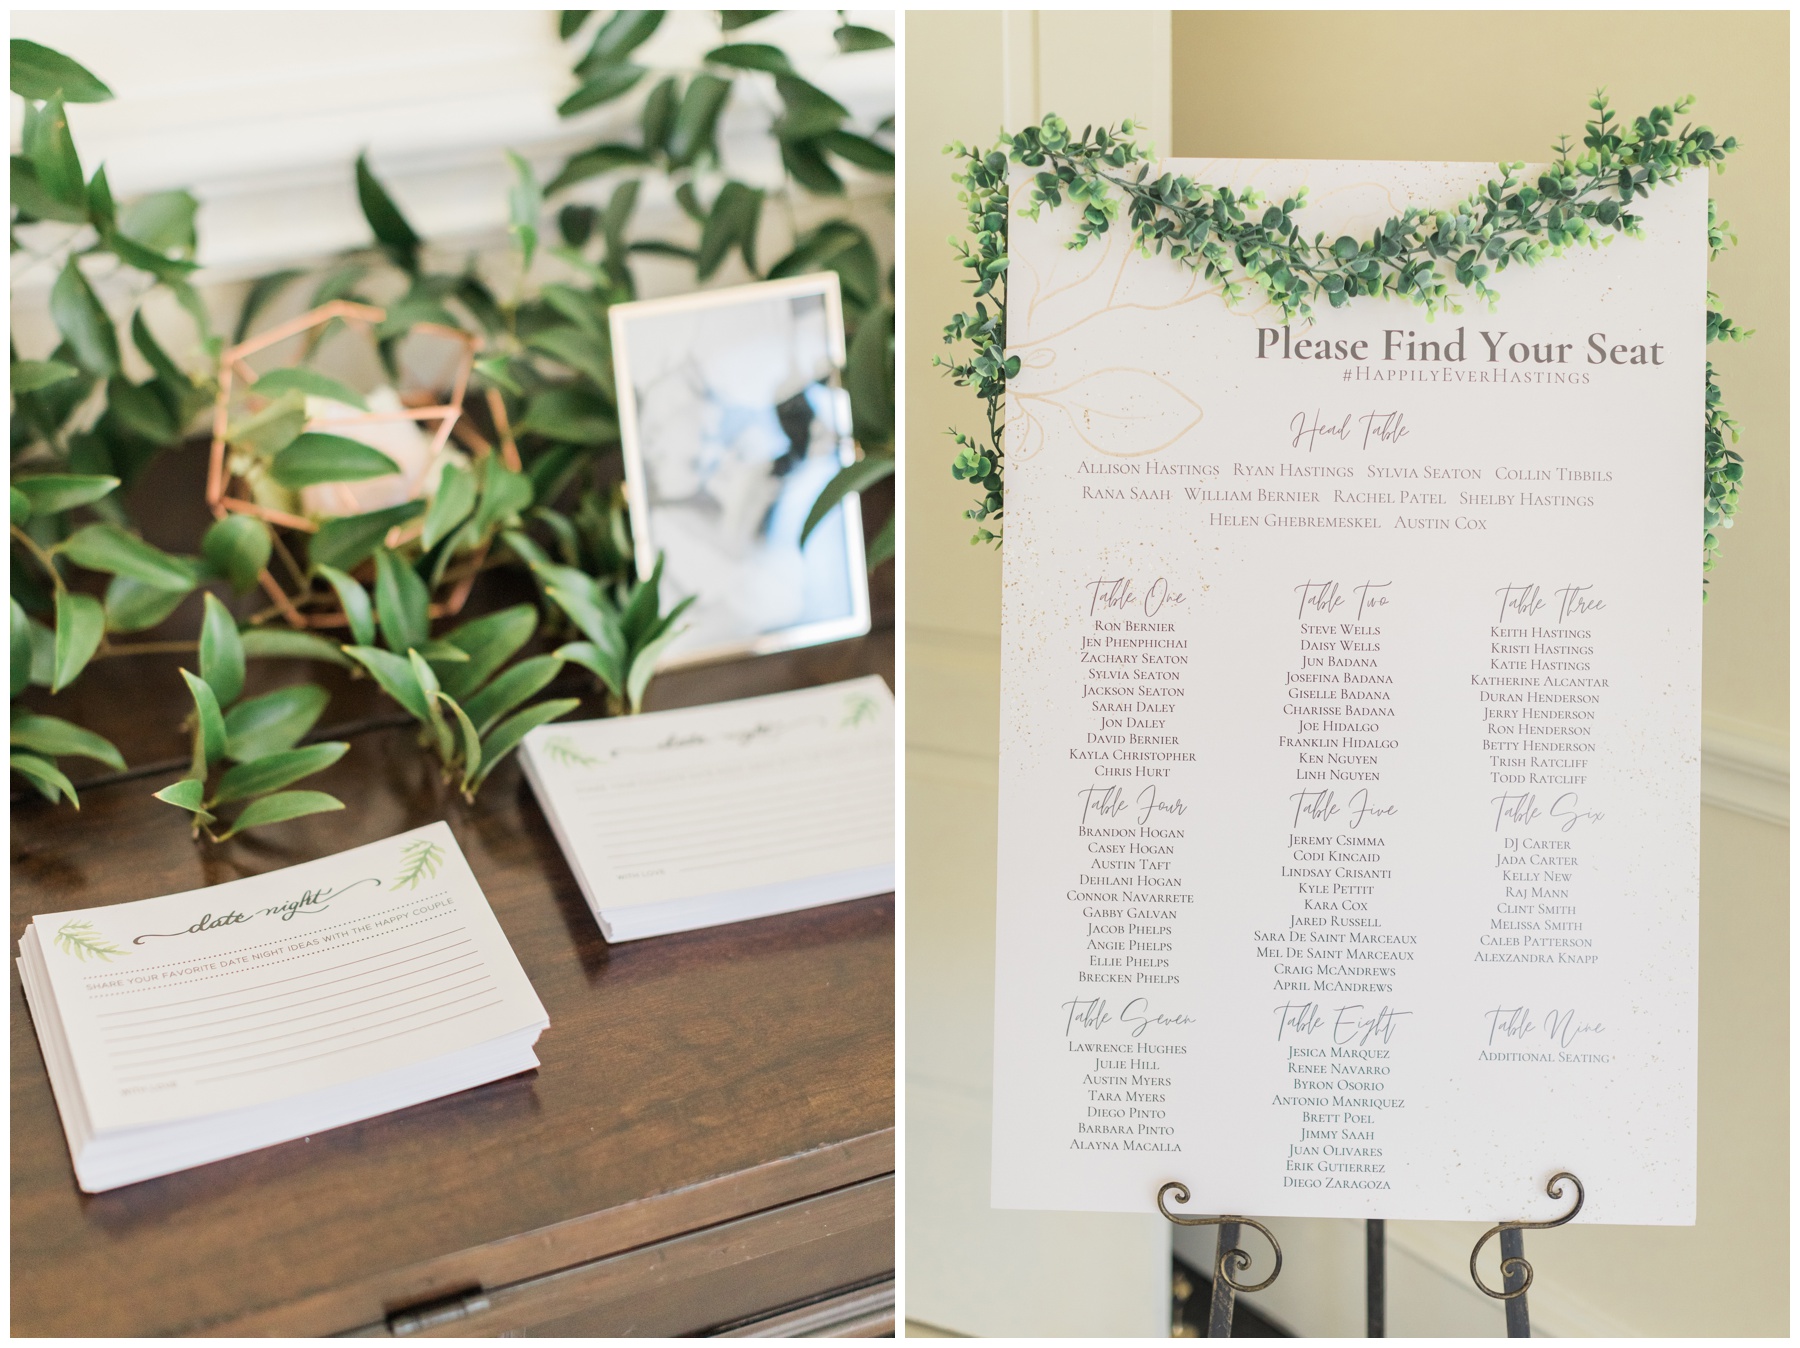 Greenery and gold accents for an indoor wedding reception